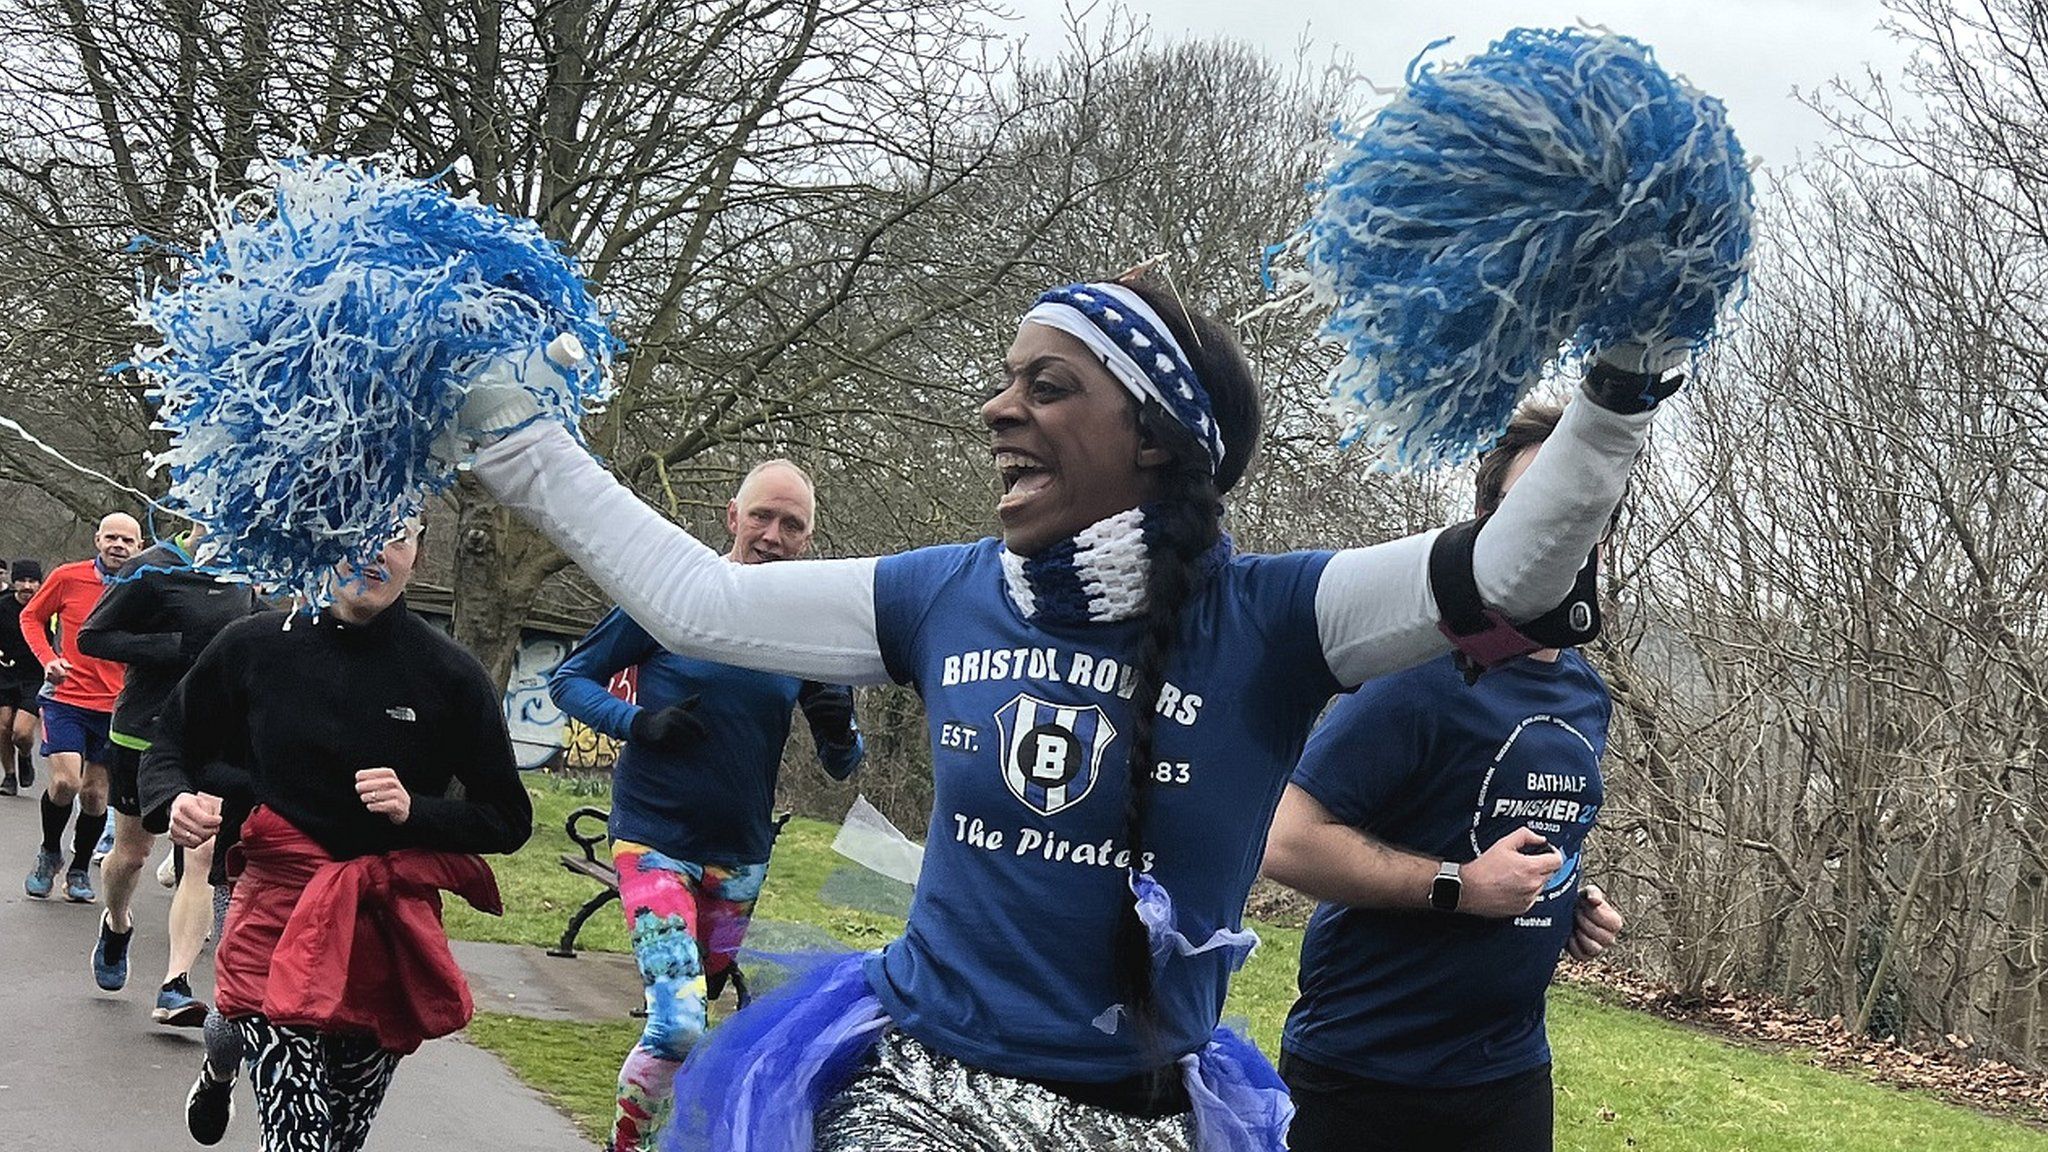 A woman wearing a Bristol Rovers t-shirt and holding pom poms runs in a park run